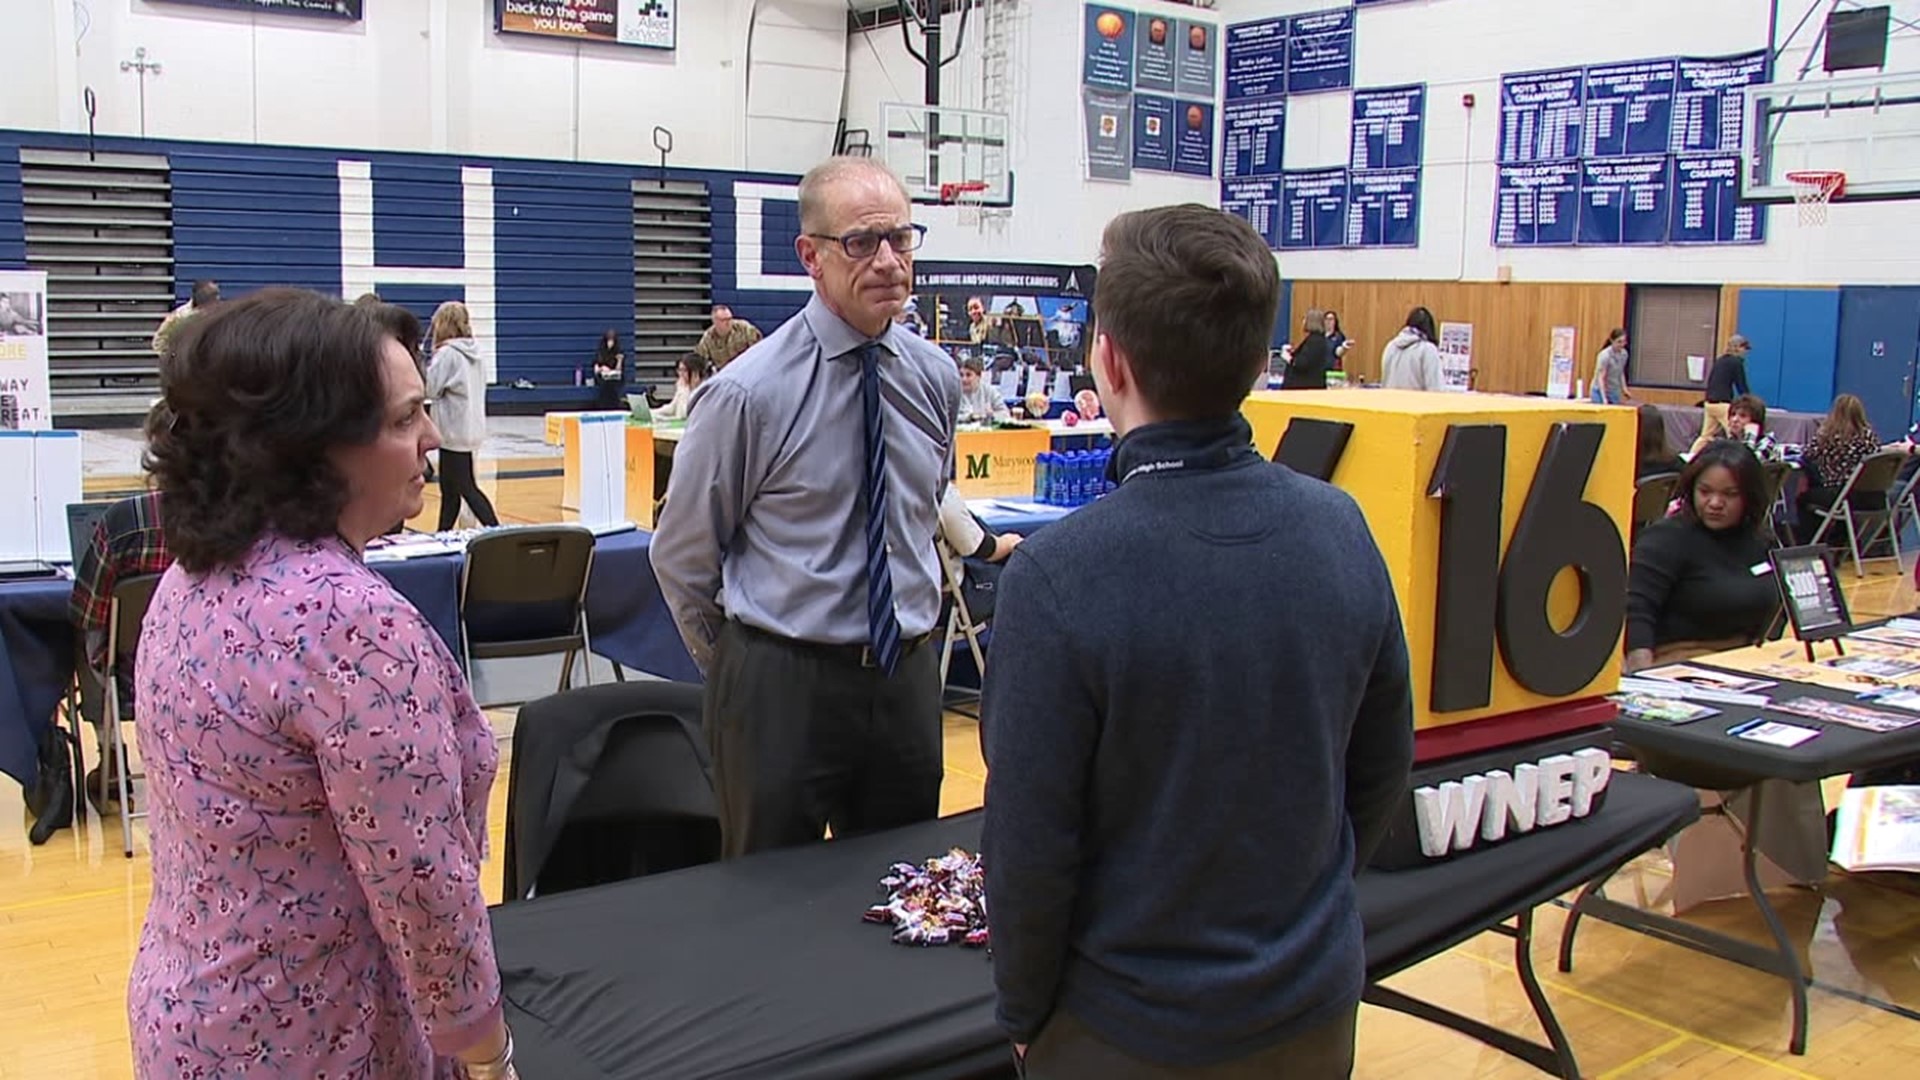 Students were able to connect for career opportunities at a career fair in Clarks Summit on Thursday.